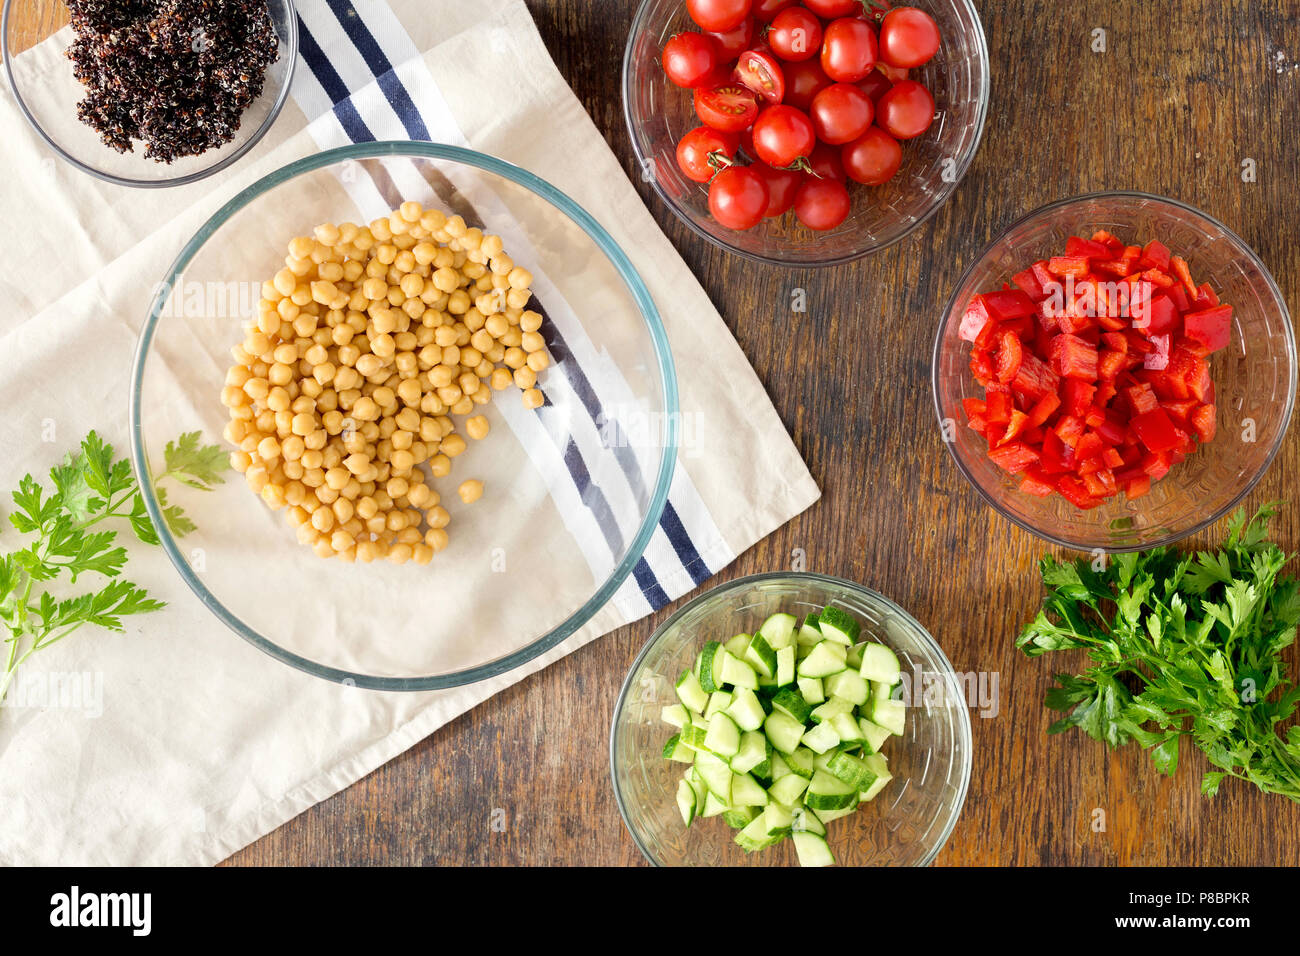 Superfood concept. Ingredients for cooking vegetarian salad with chickpeas, black quinoa and vegetables on wooden table, top view Stock Photo